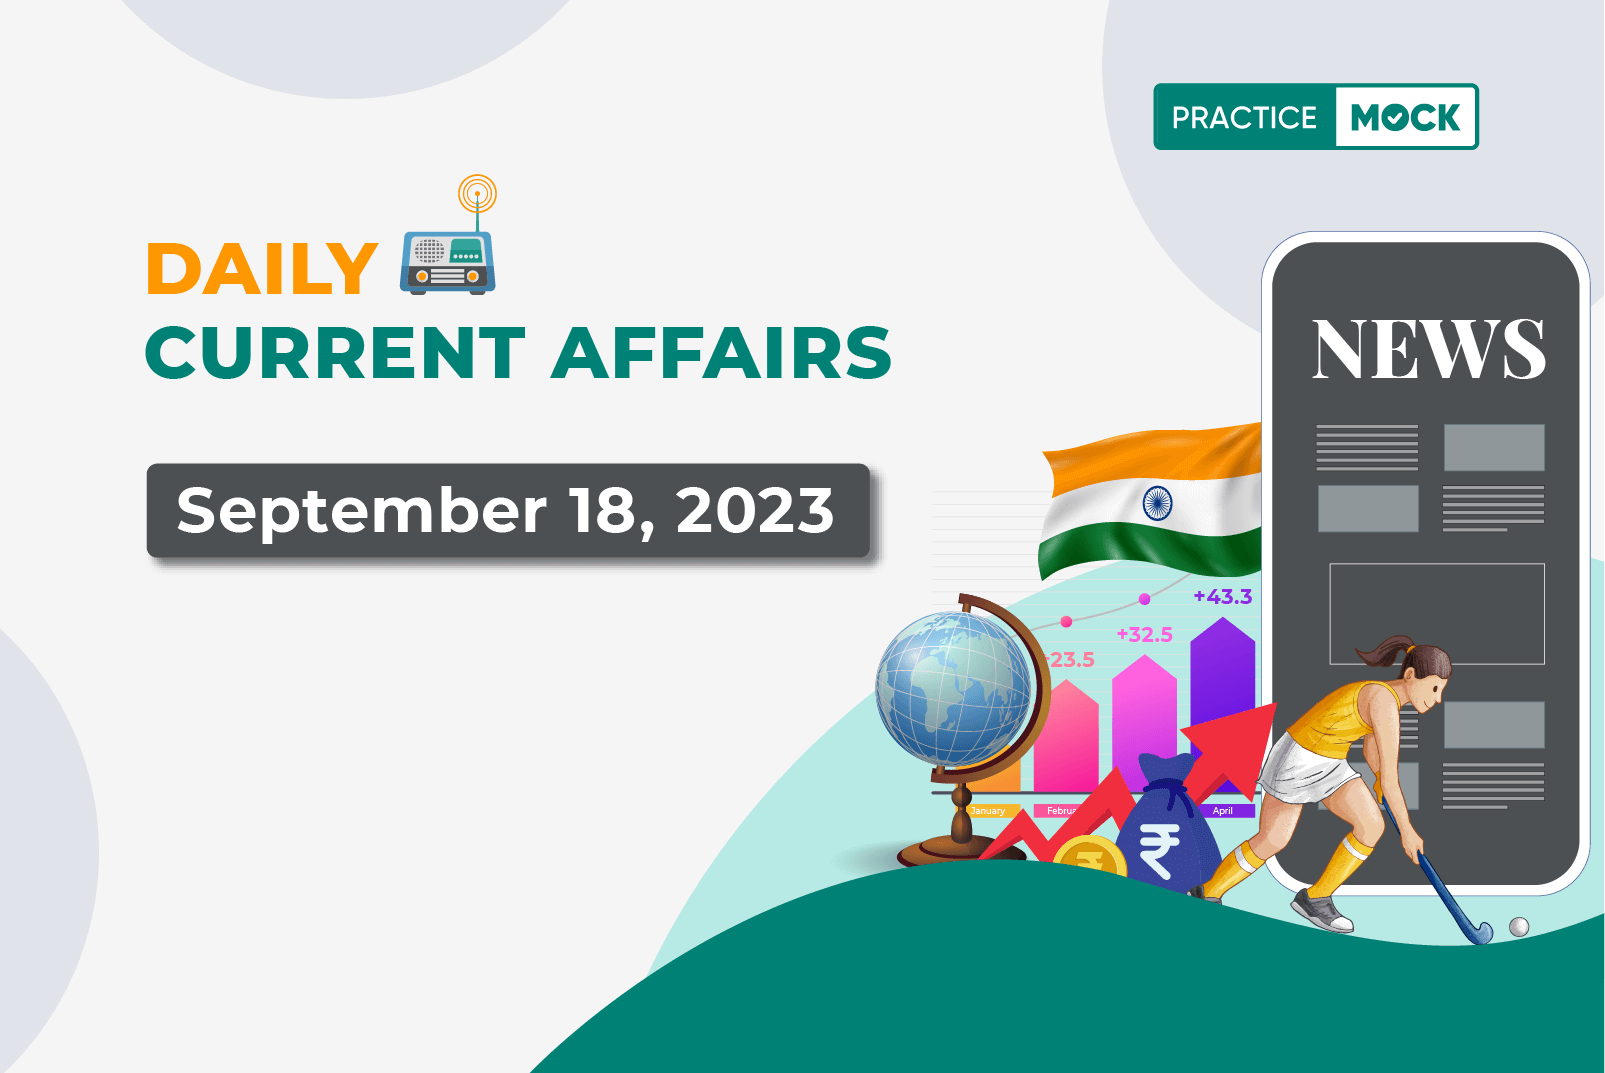 Daily Current Affairs- September 18, 2023